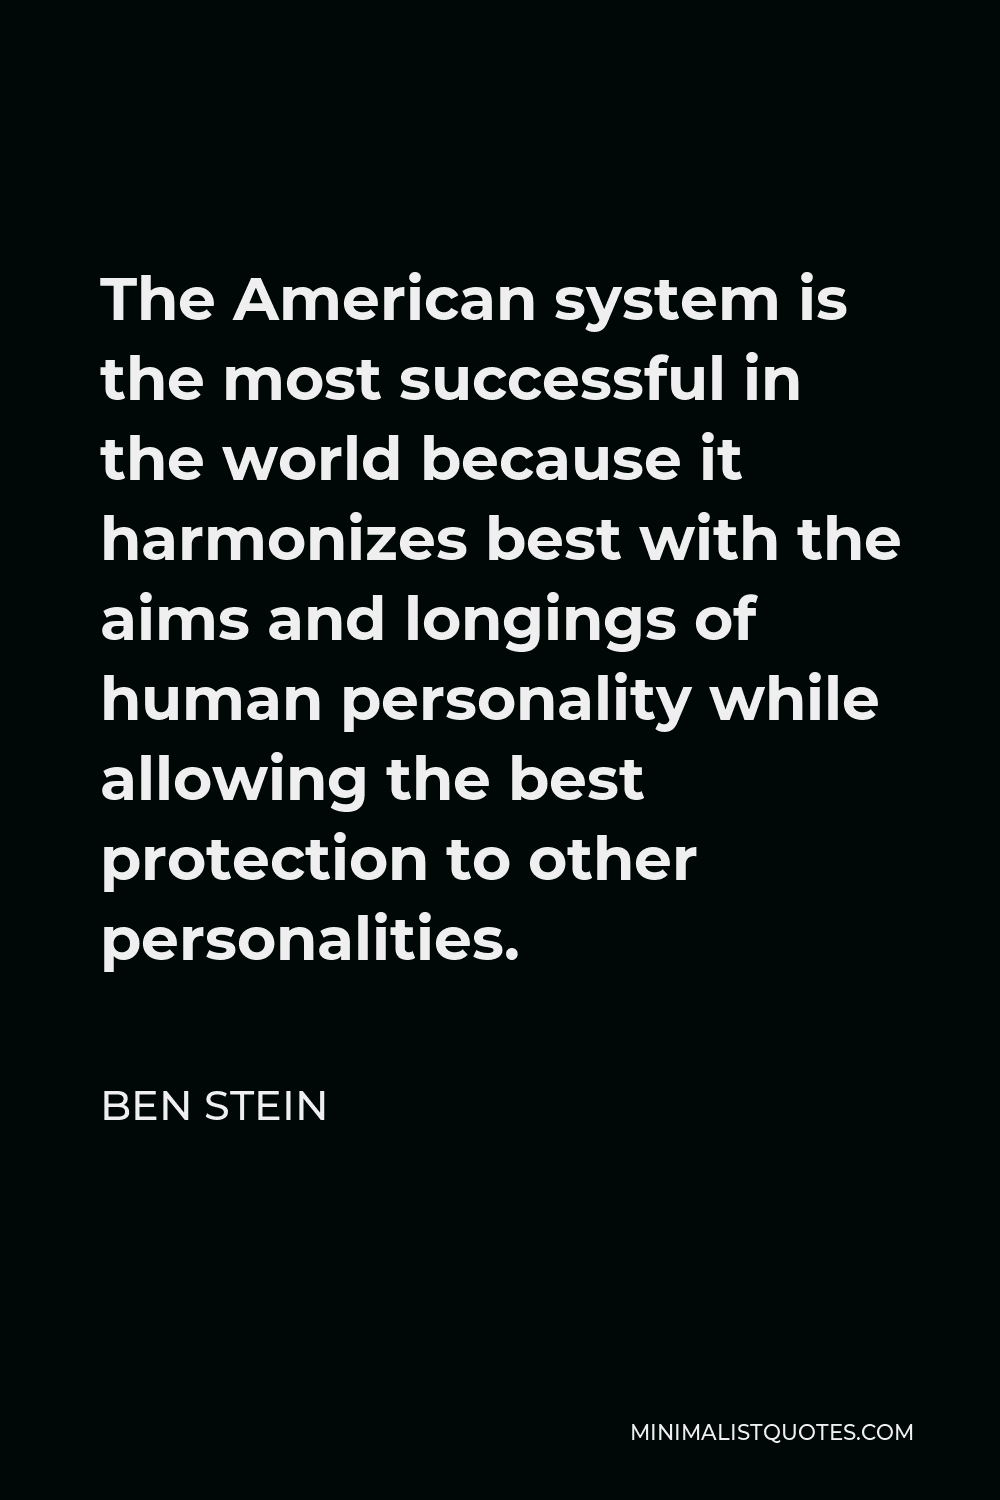 Ben Stein Quote - The American system is the most successful in the world because it harmonizes best with the aims and longings of human personality while allowing the best protection to other personalities.